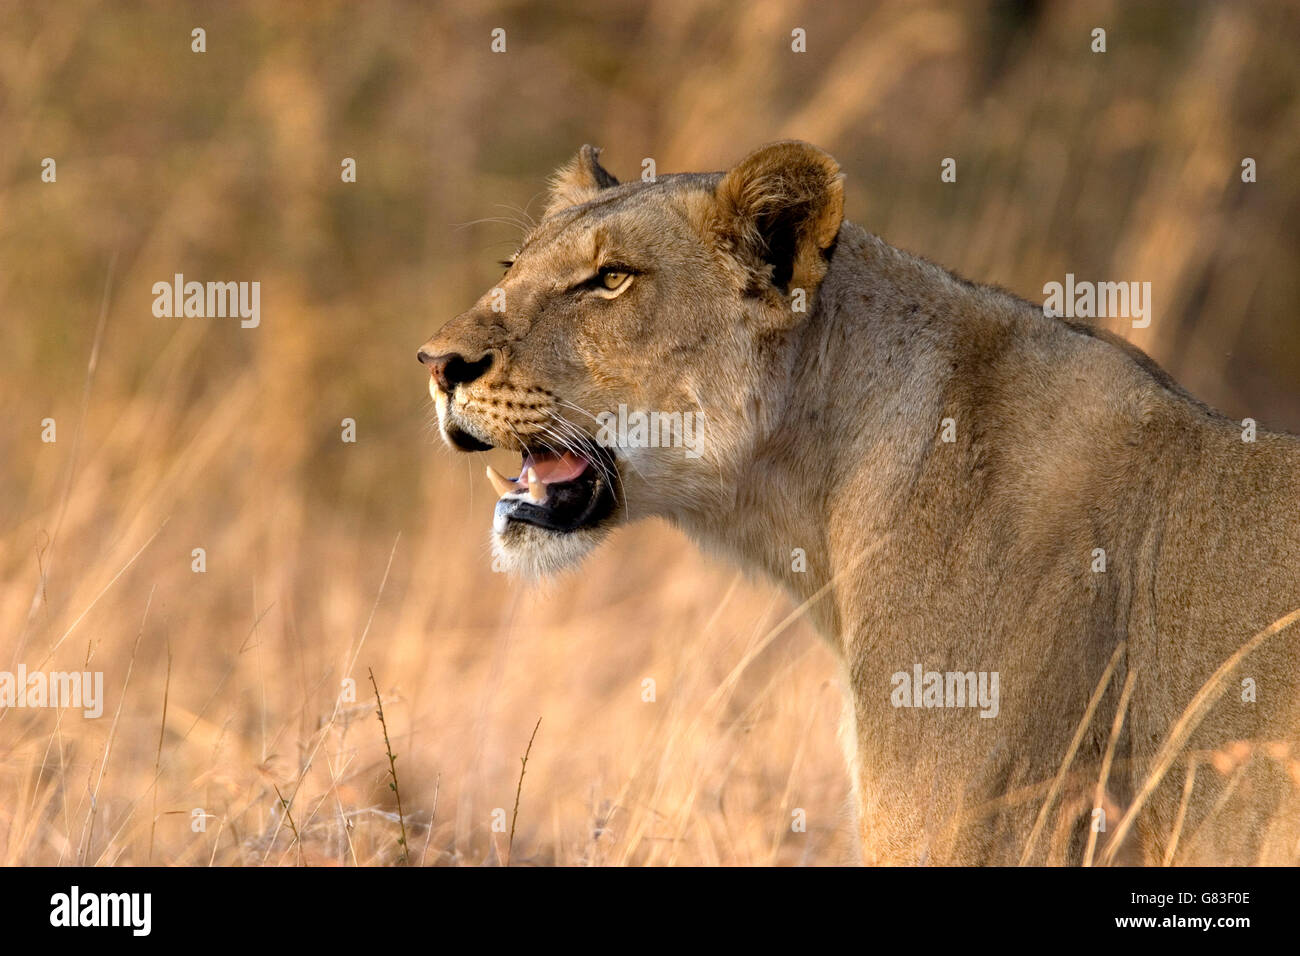 Lioness, Kruger National Park, South Africa Stock Photo